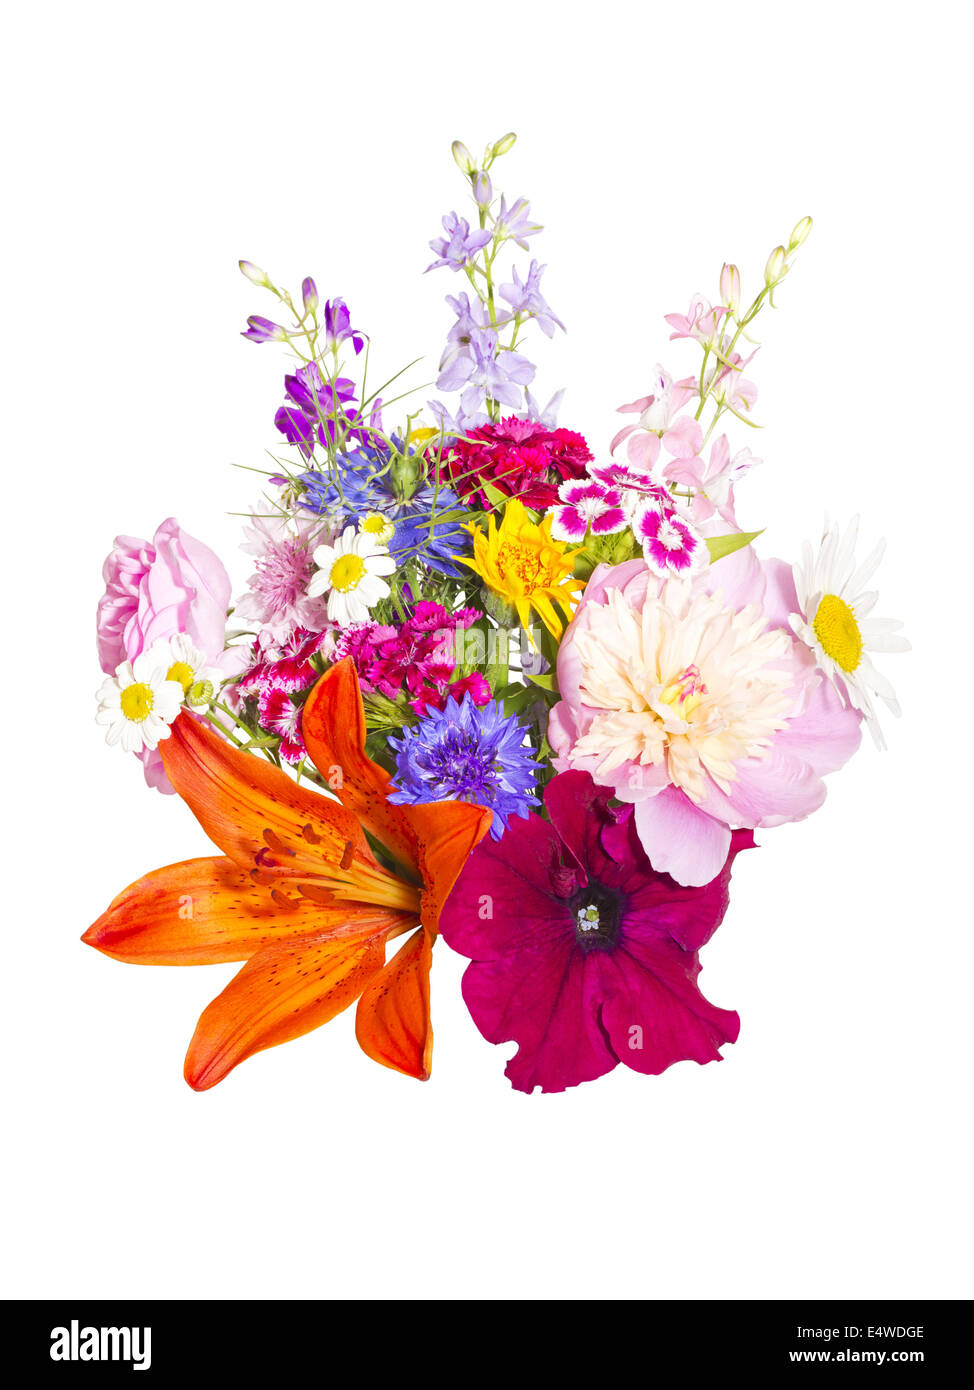 a bouquet of summer flowers Stock Photo